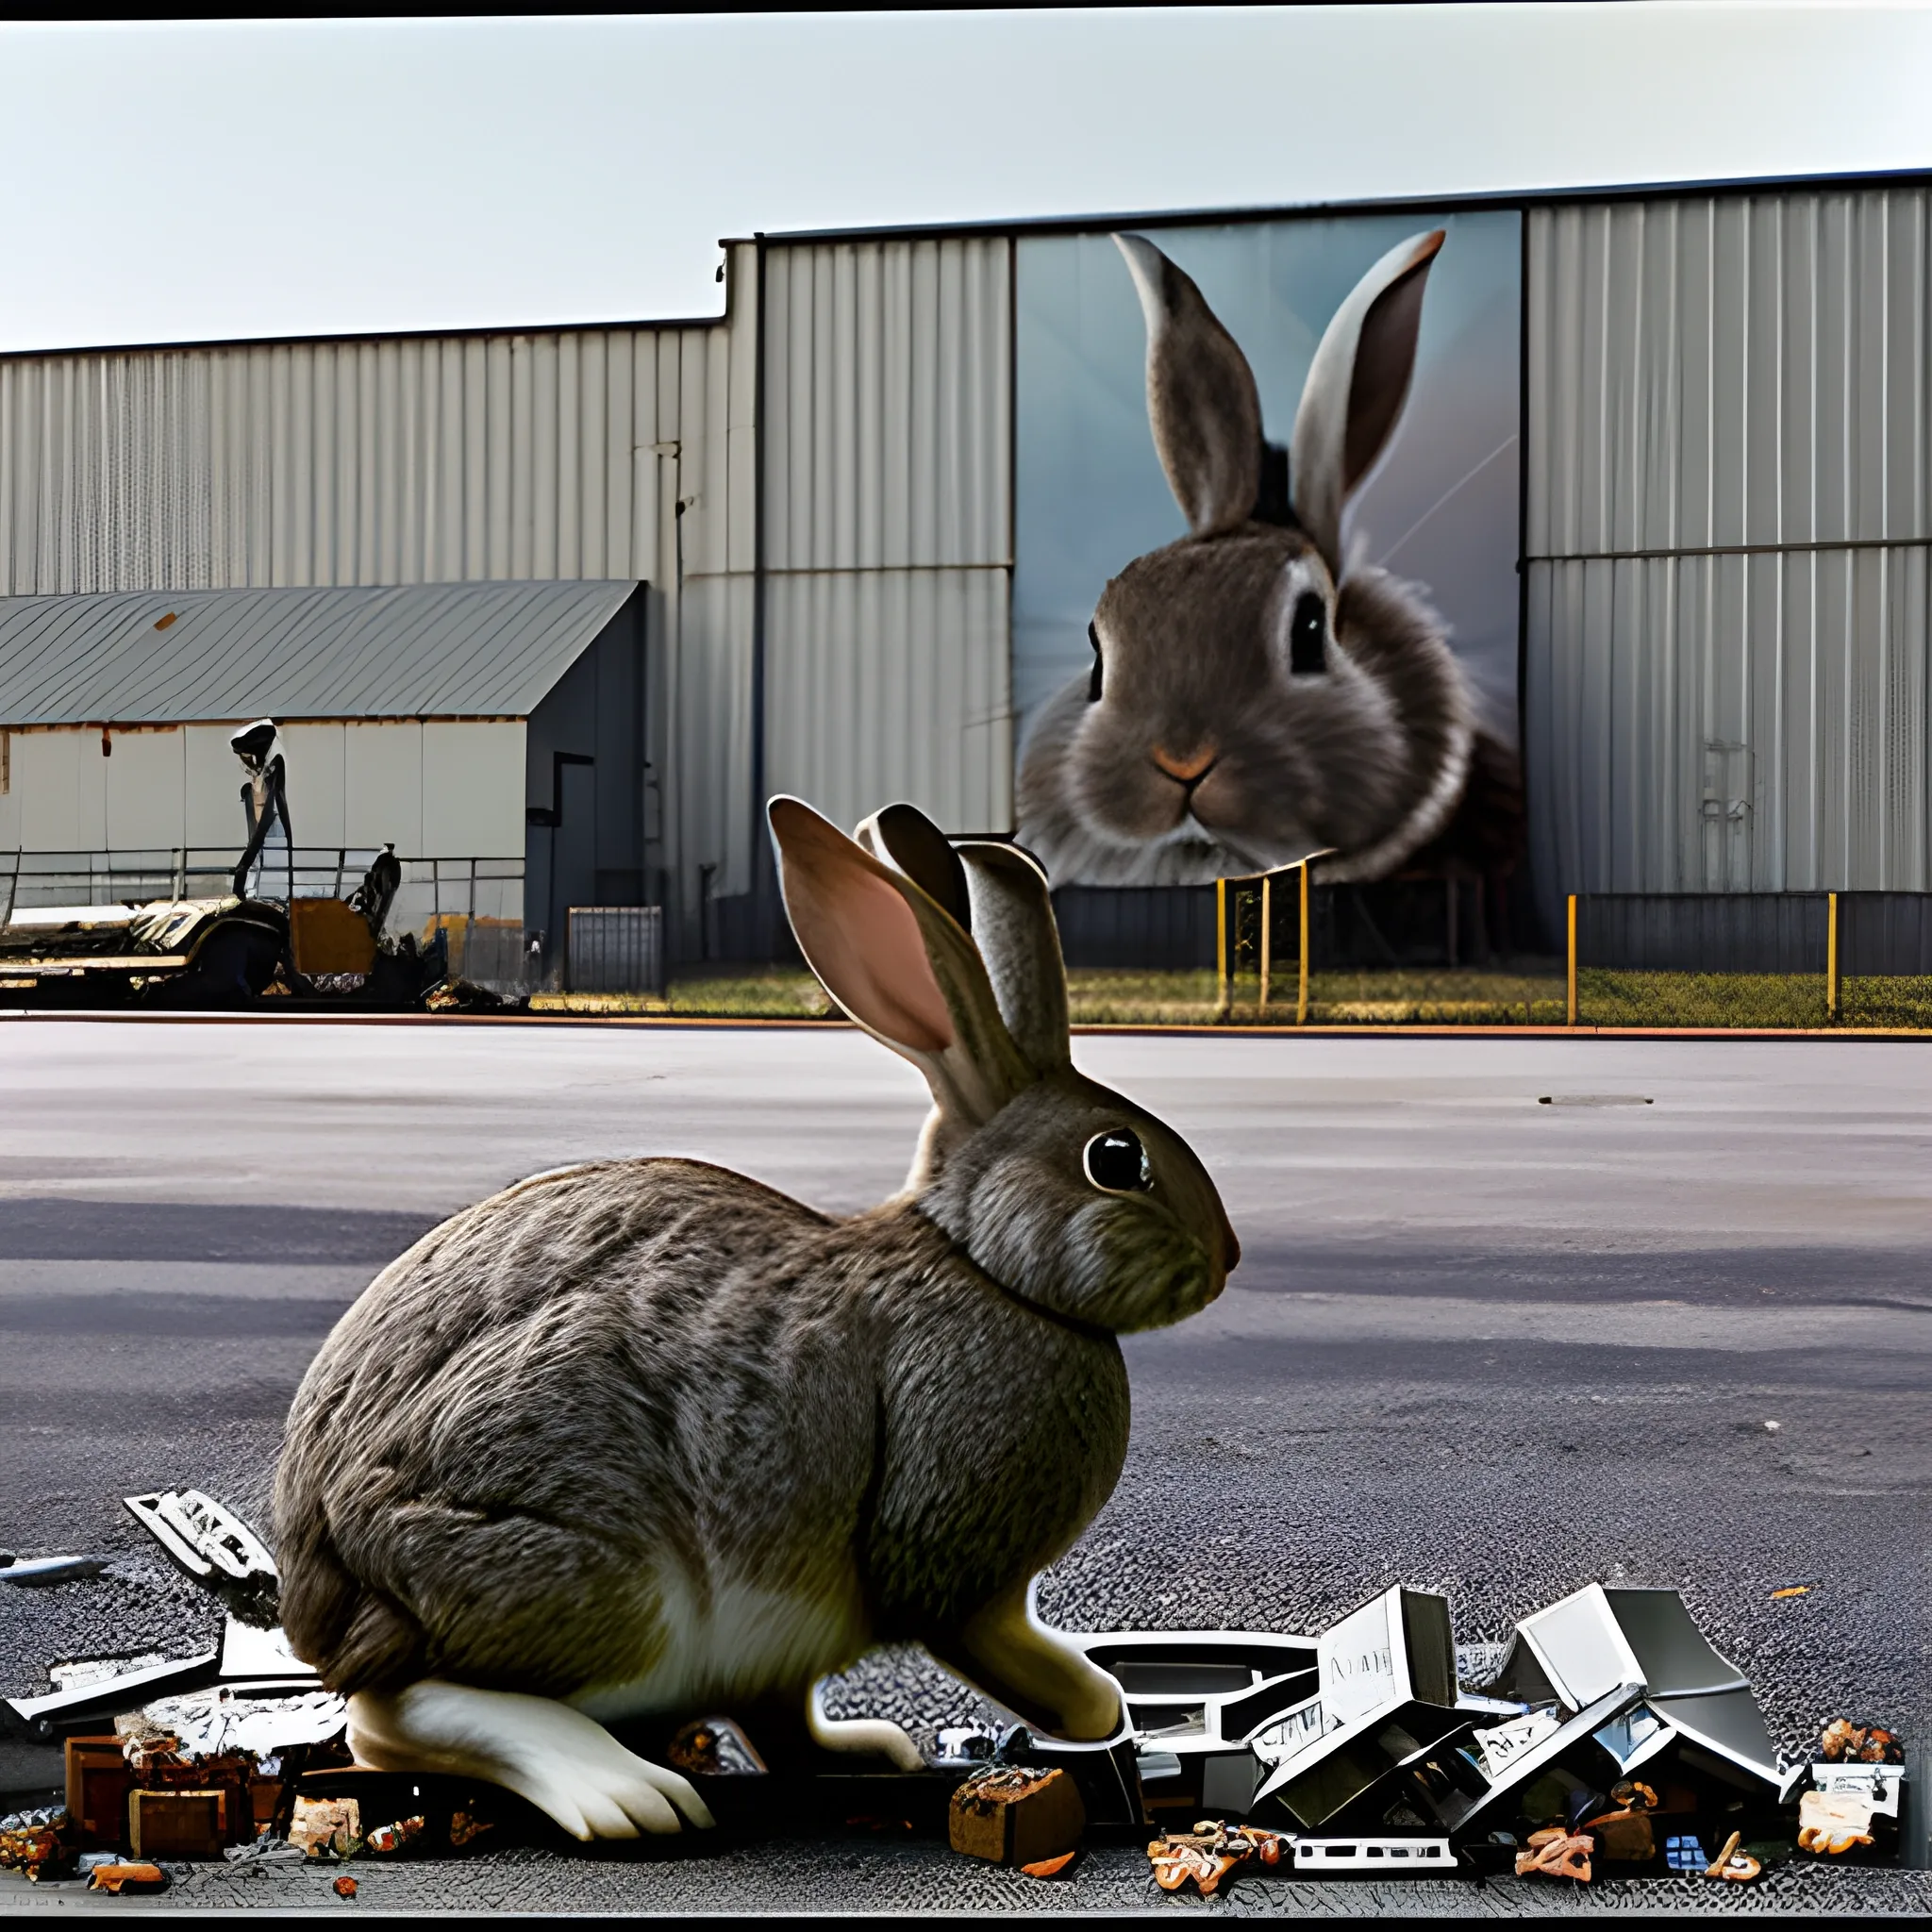 a large rabbit devours pieces of metal in front of a factory, photograph